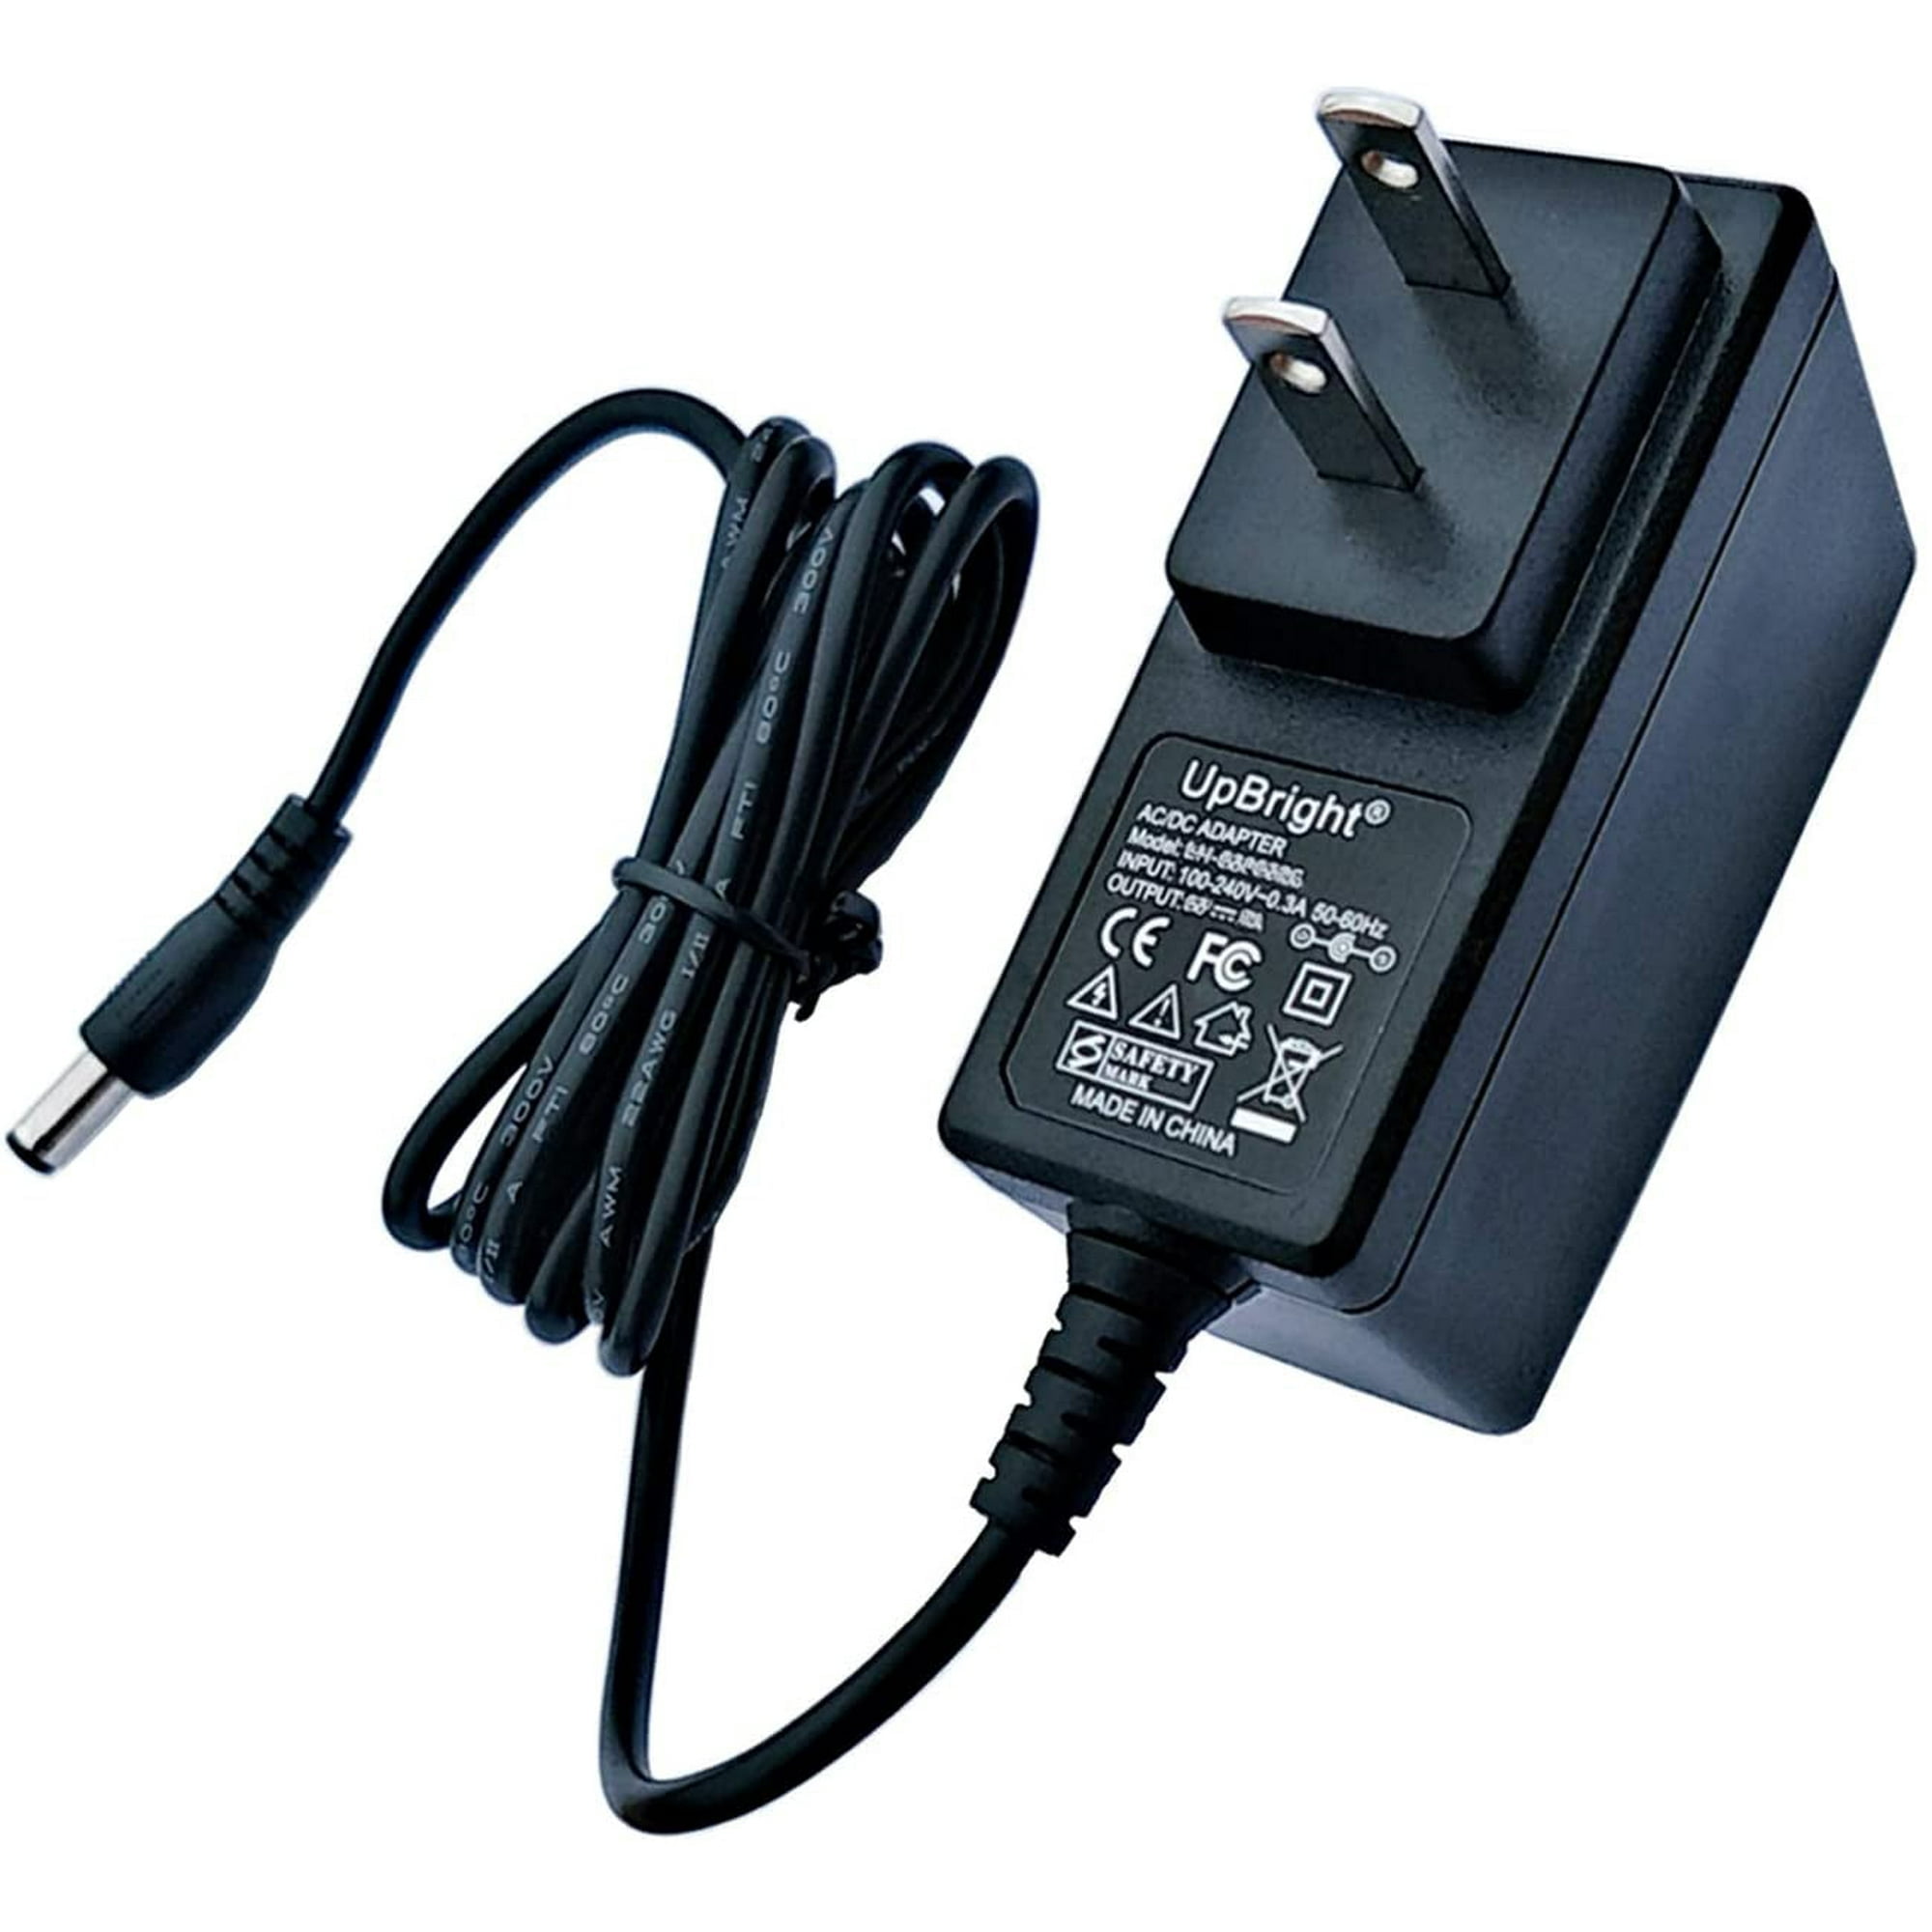 UpBright AC/DC Adapter for Mophie Powerstation Go Supreme